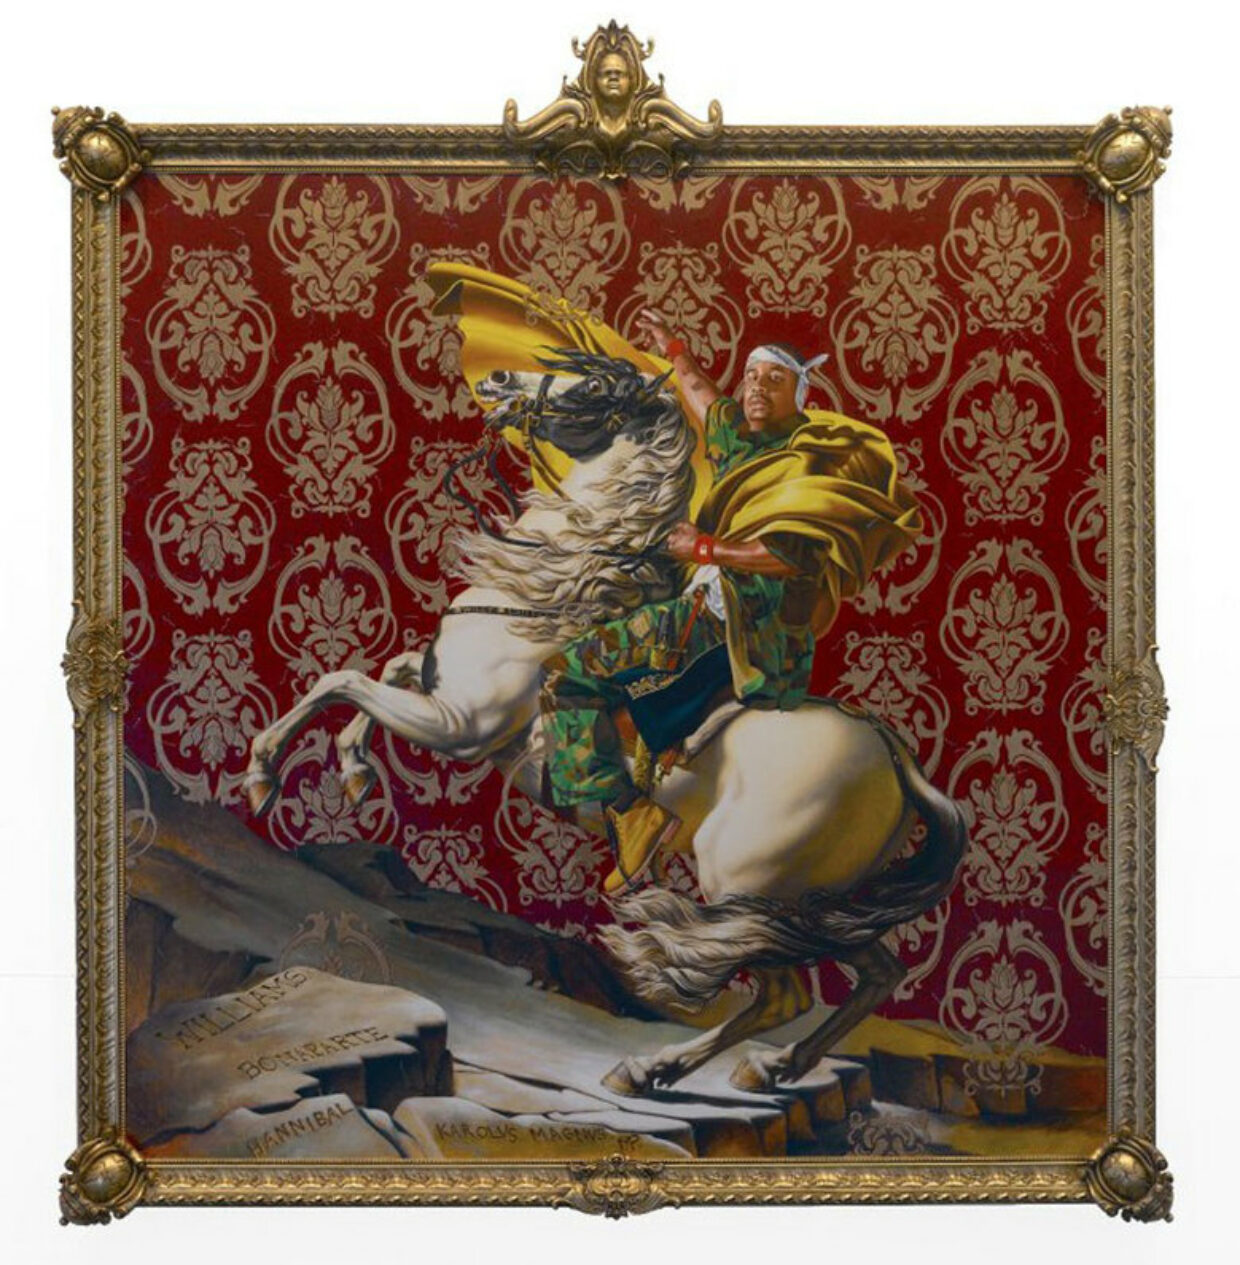 A New Republic: Kehinde Wiley’s Work at Seattle Art Museum | 5